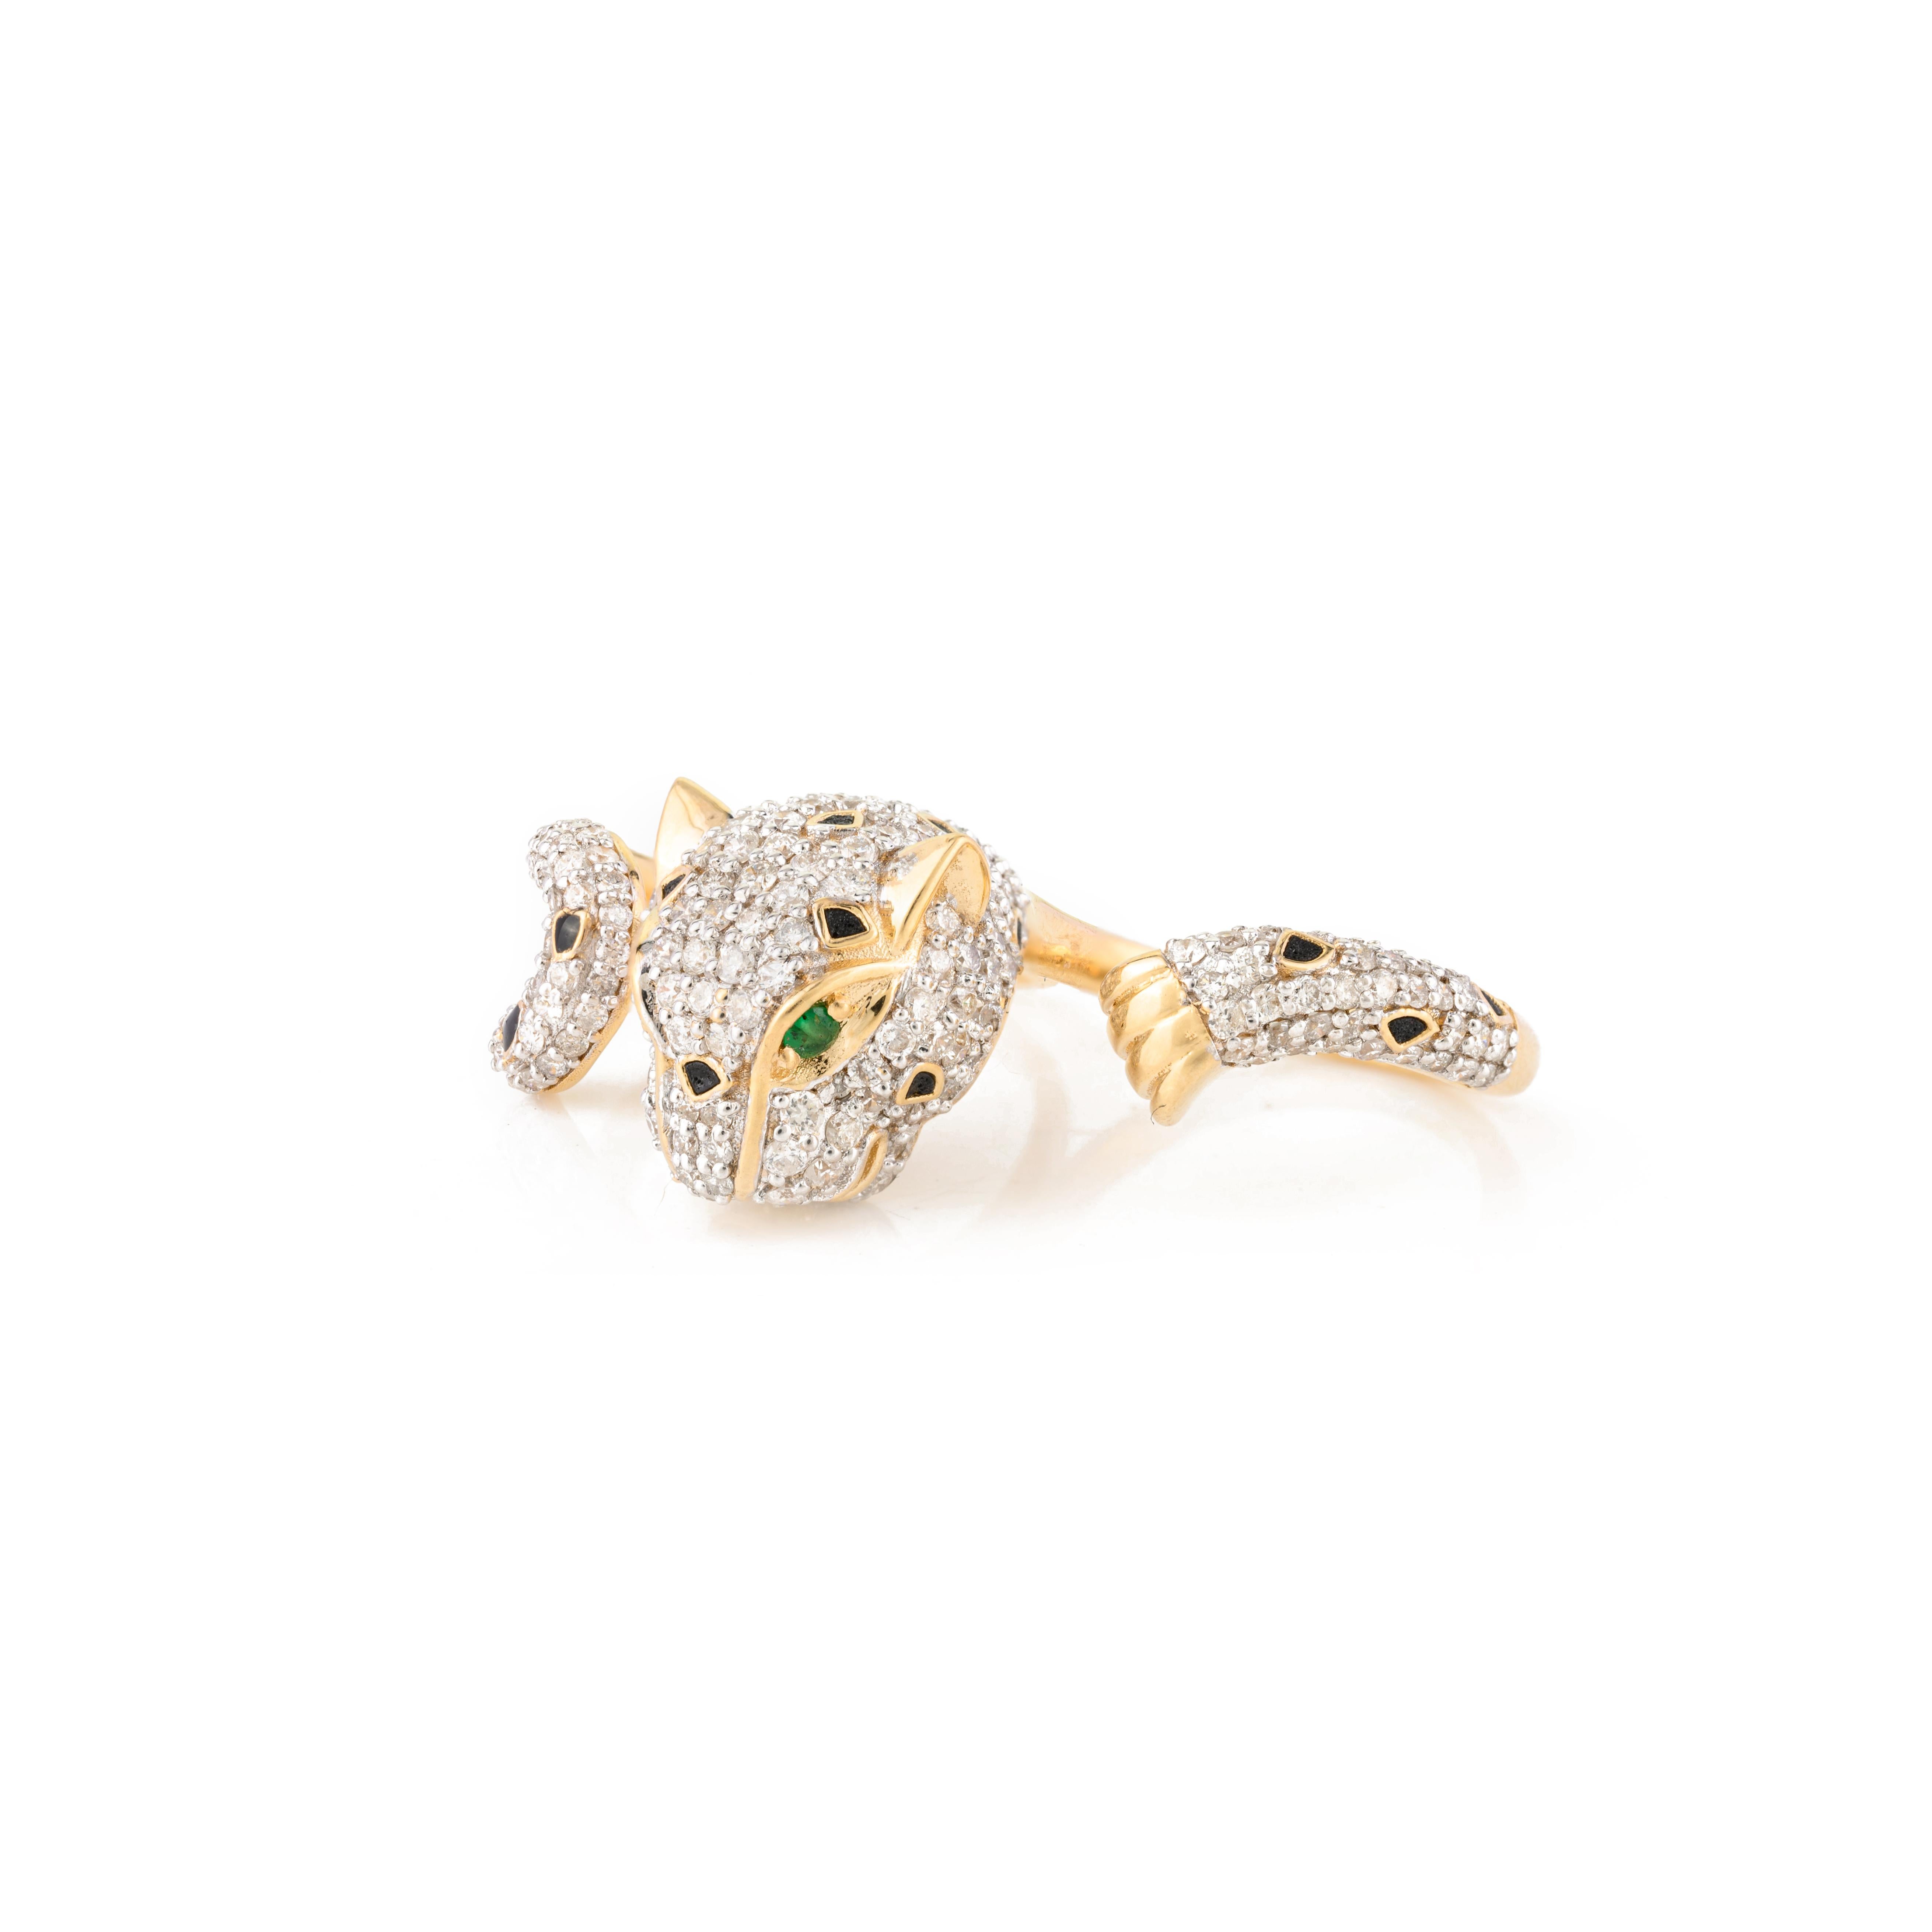 For Sale:  Statement 2.06 Carat Diamond Panther Double Finger Ring in 18k Yellow Gold 3